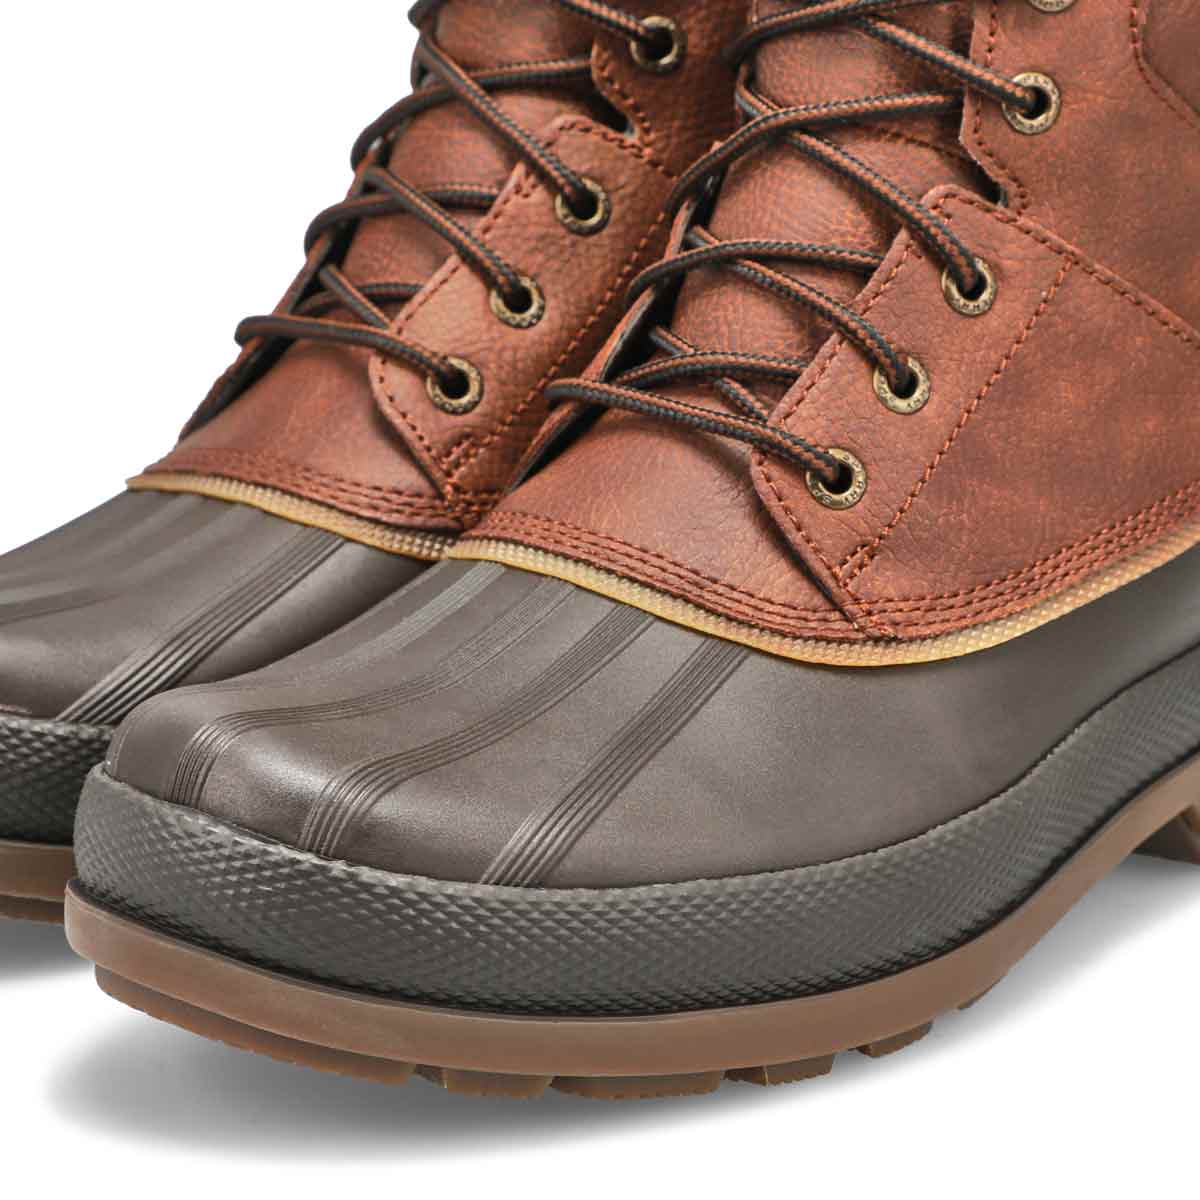 Men's COLD BAY CHUKKA brn waterproof lace up boots